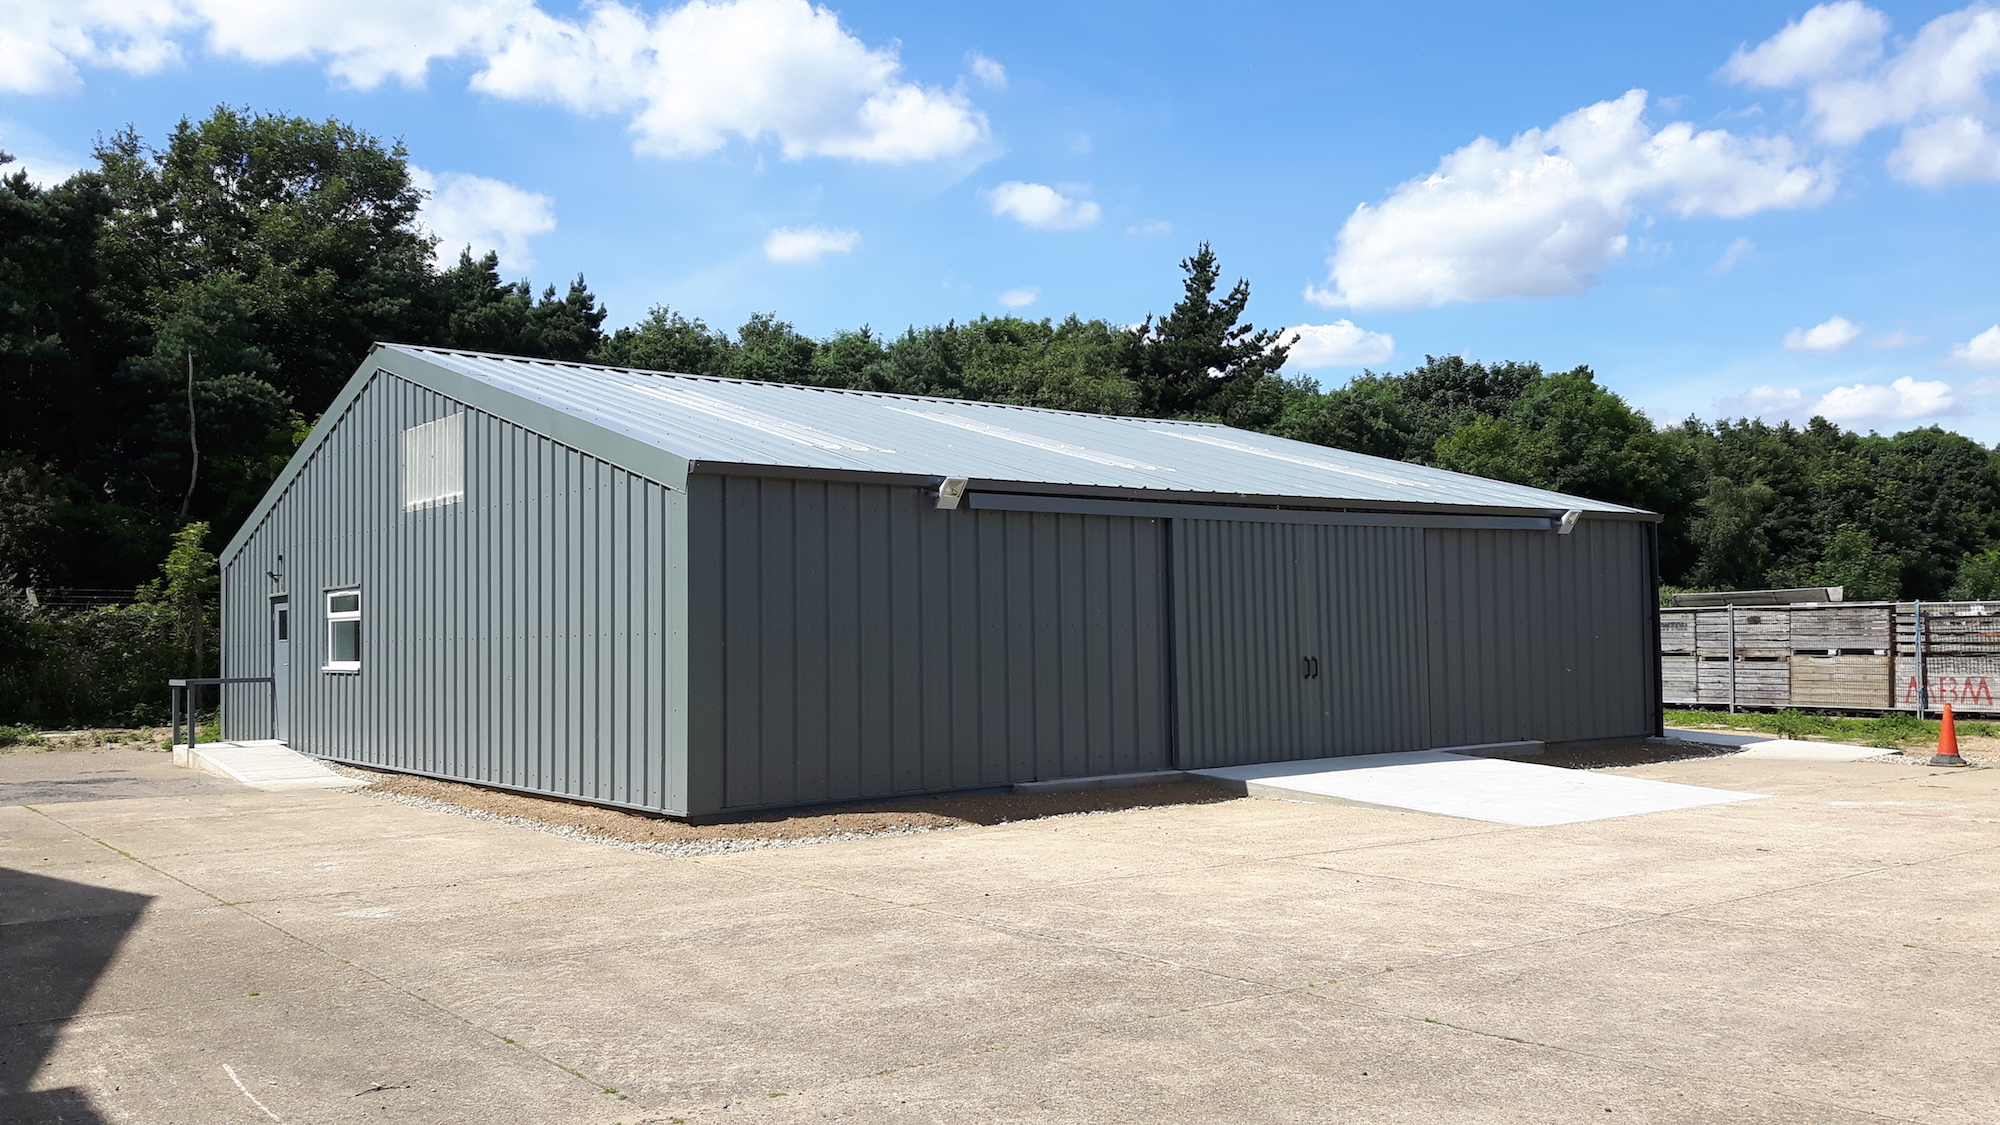 15-010-RAF-USAF-Washdown Shed-Barn-Industrial-Commercial-Finished-Warehouse-Conversion-Naturally Lit-External View-001.jpg